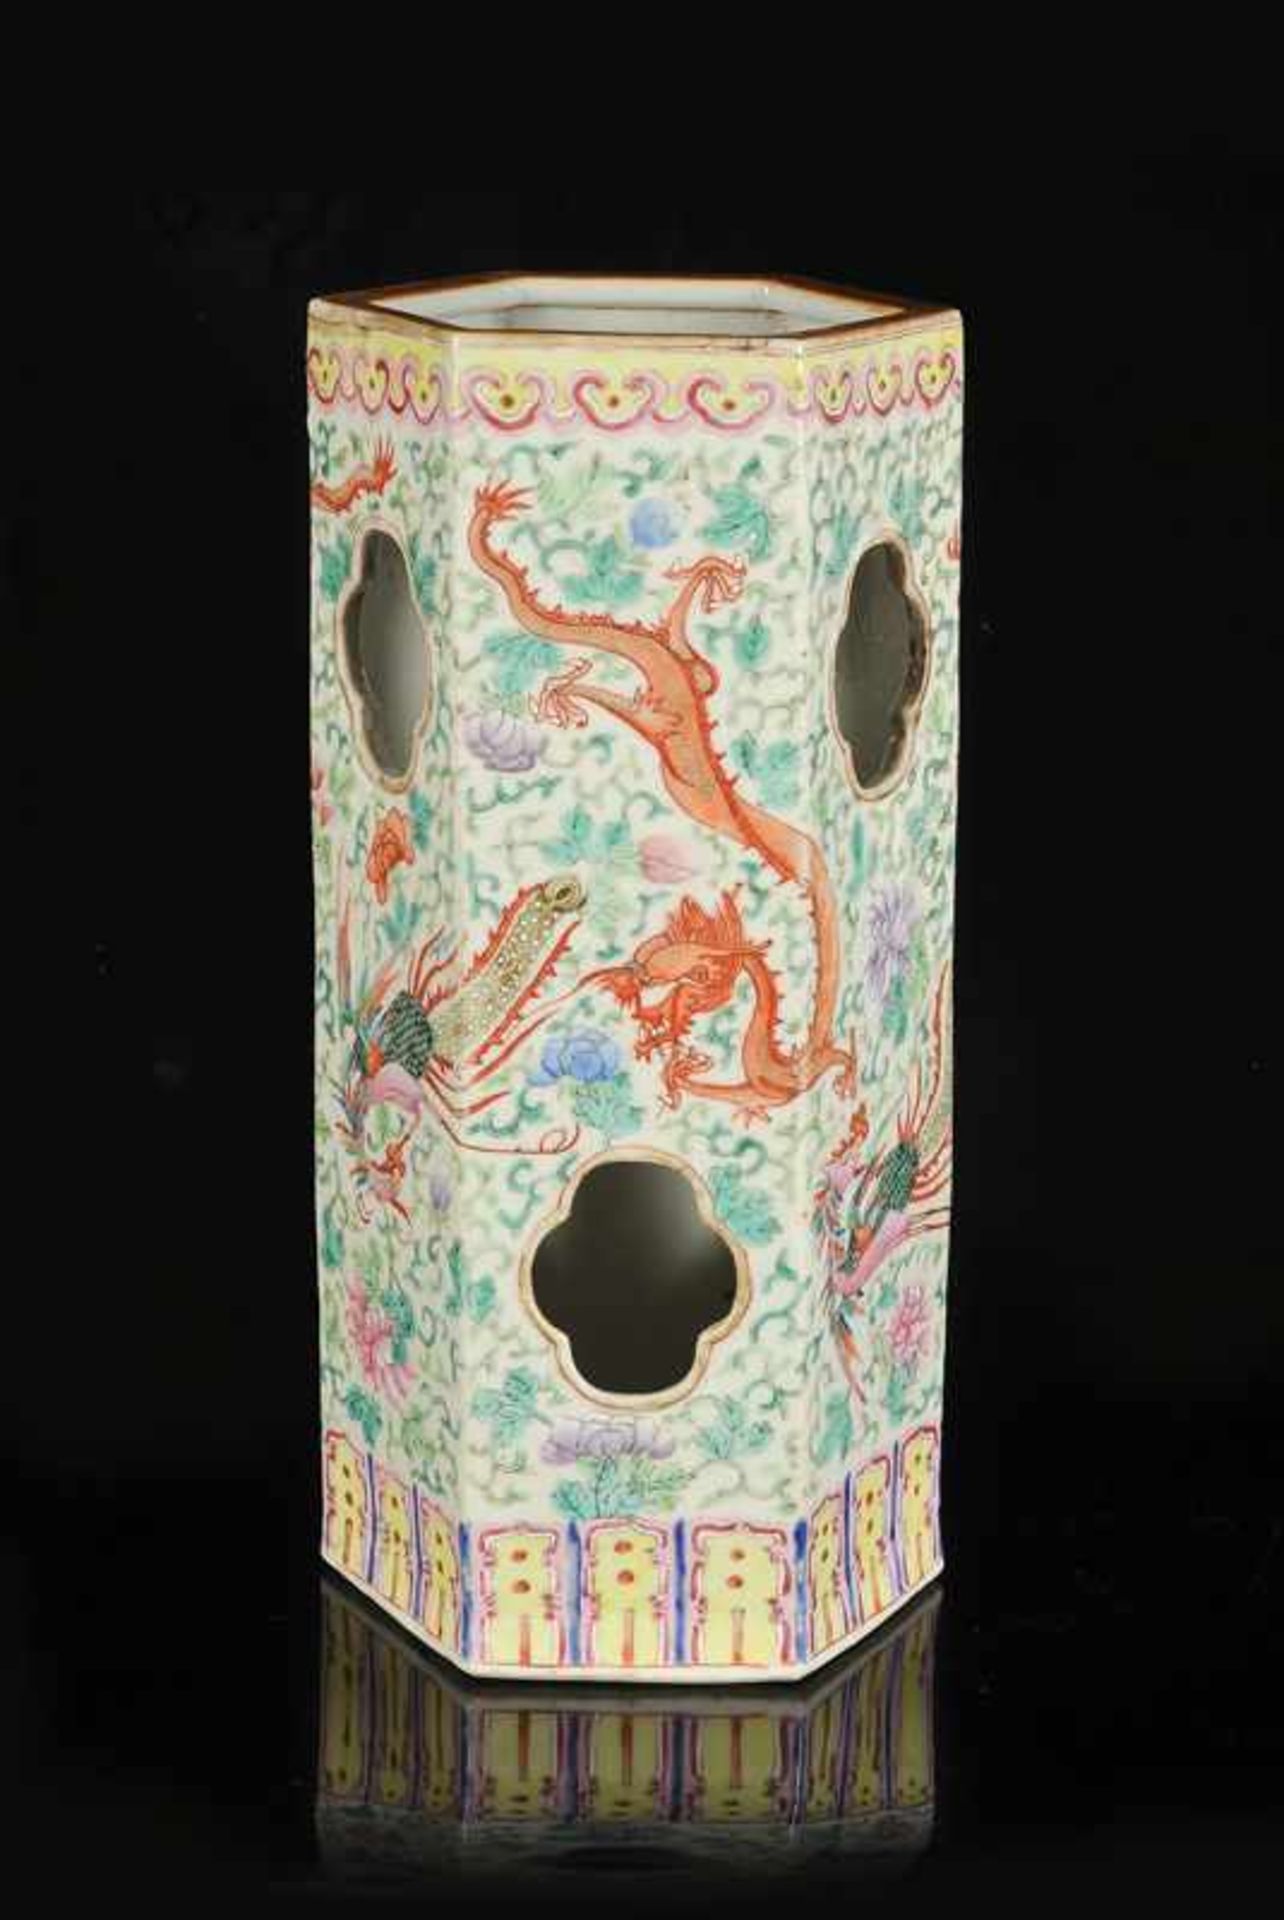 A polychrome porcelain hatstand with a decor of dragons and a phoenix. Marked with seal mark